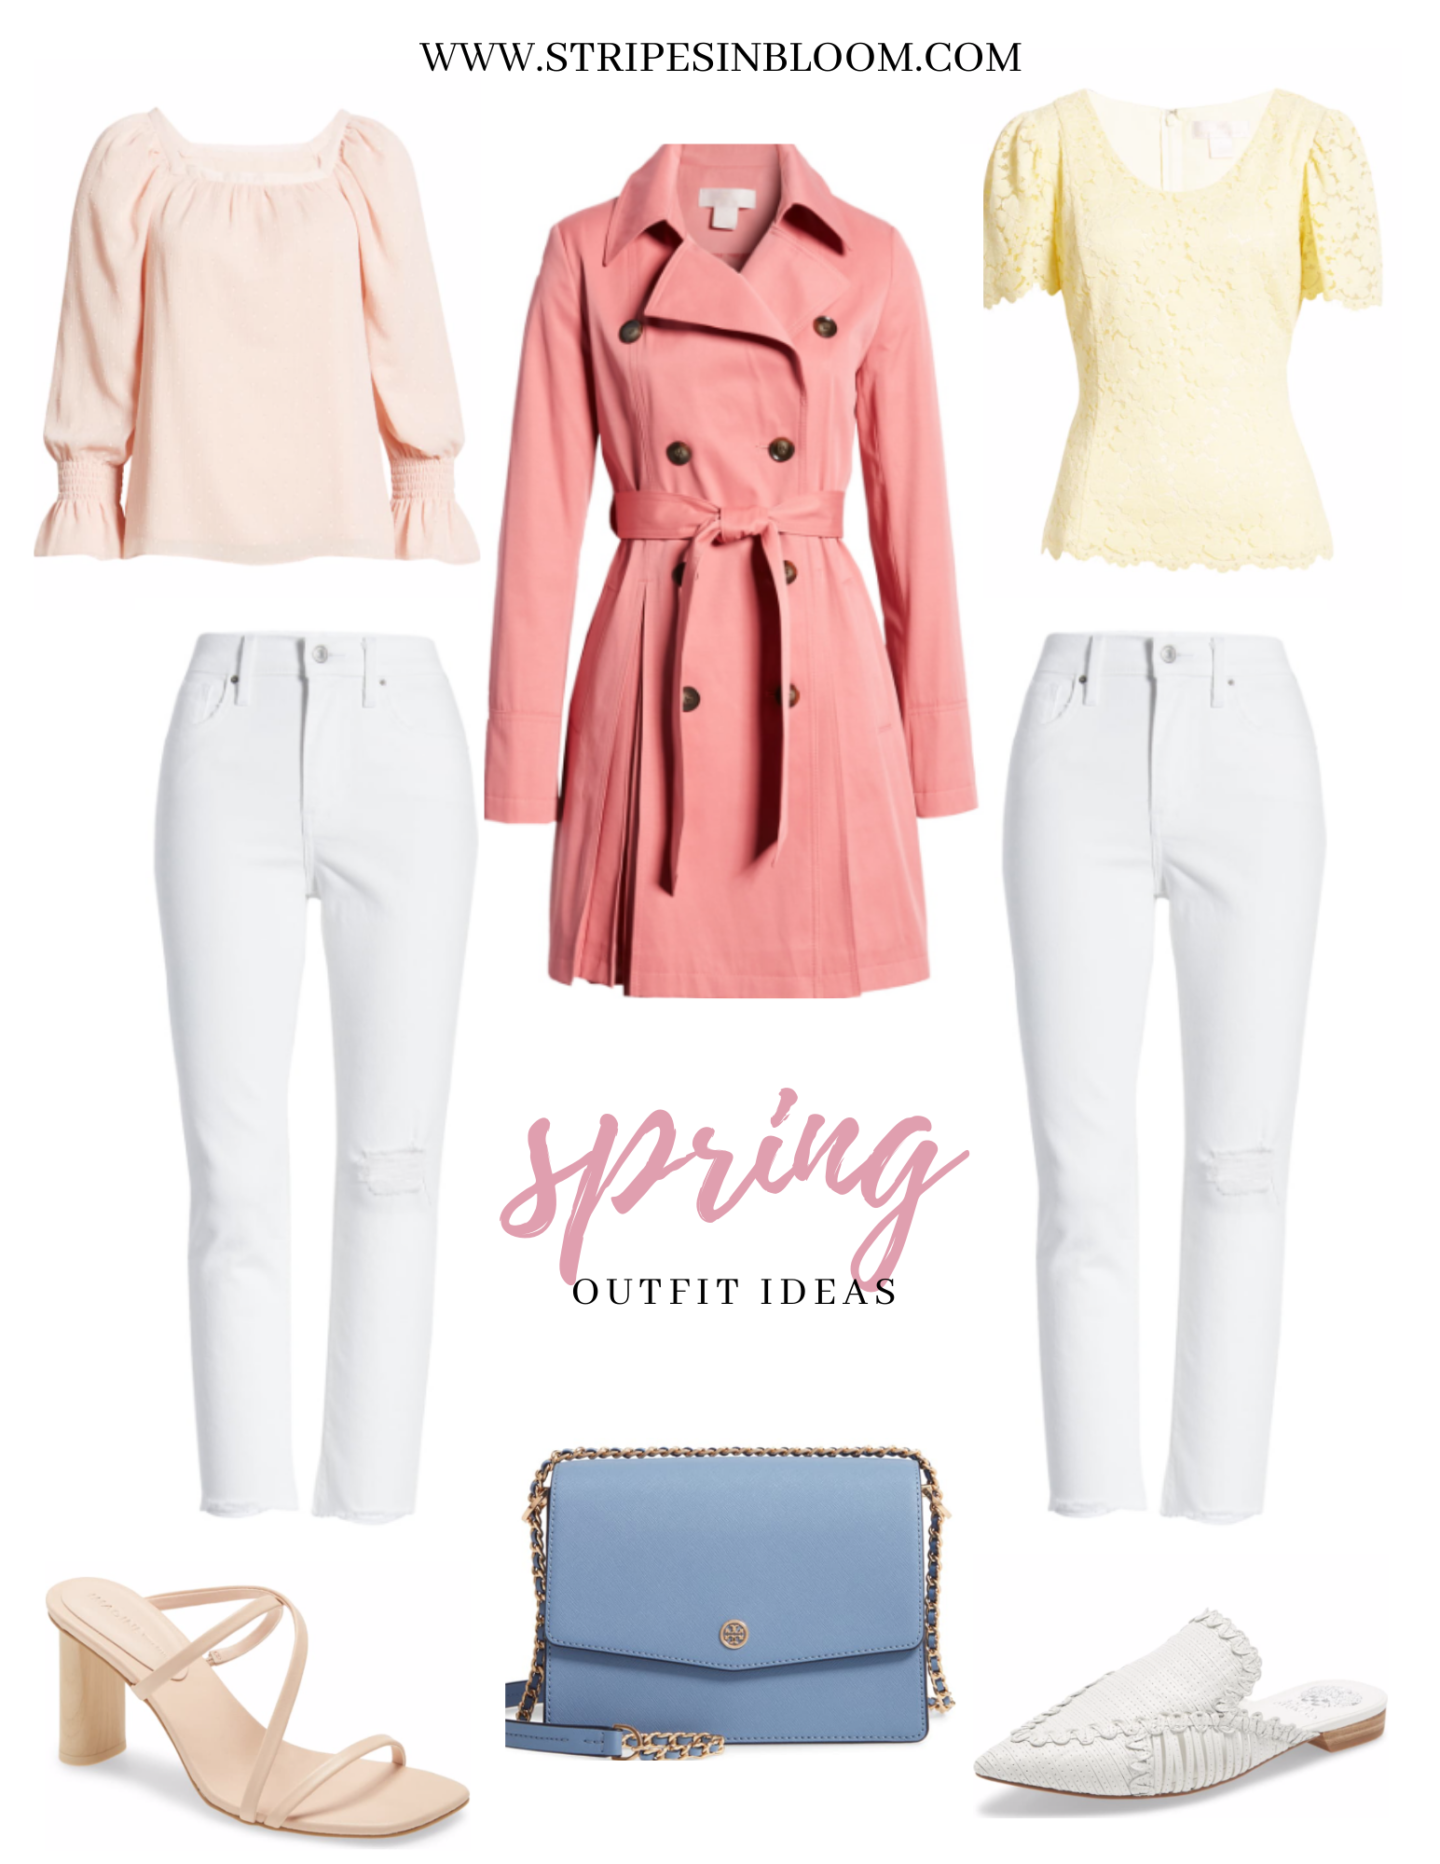 NORDSTROM SPRING FAVORITES + OUTFIT IDEAS